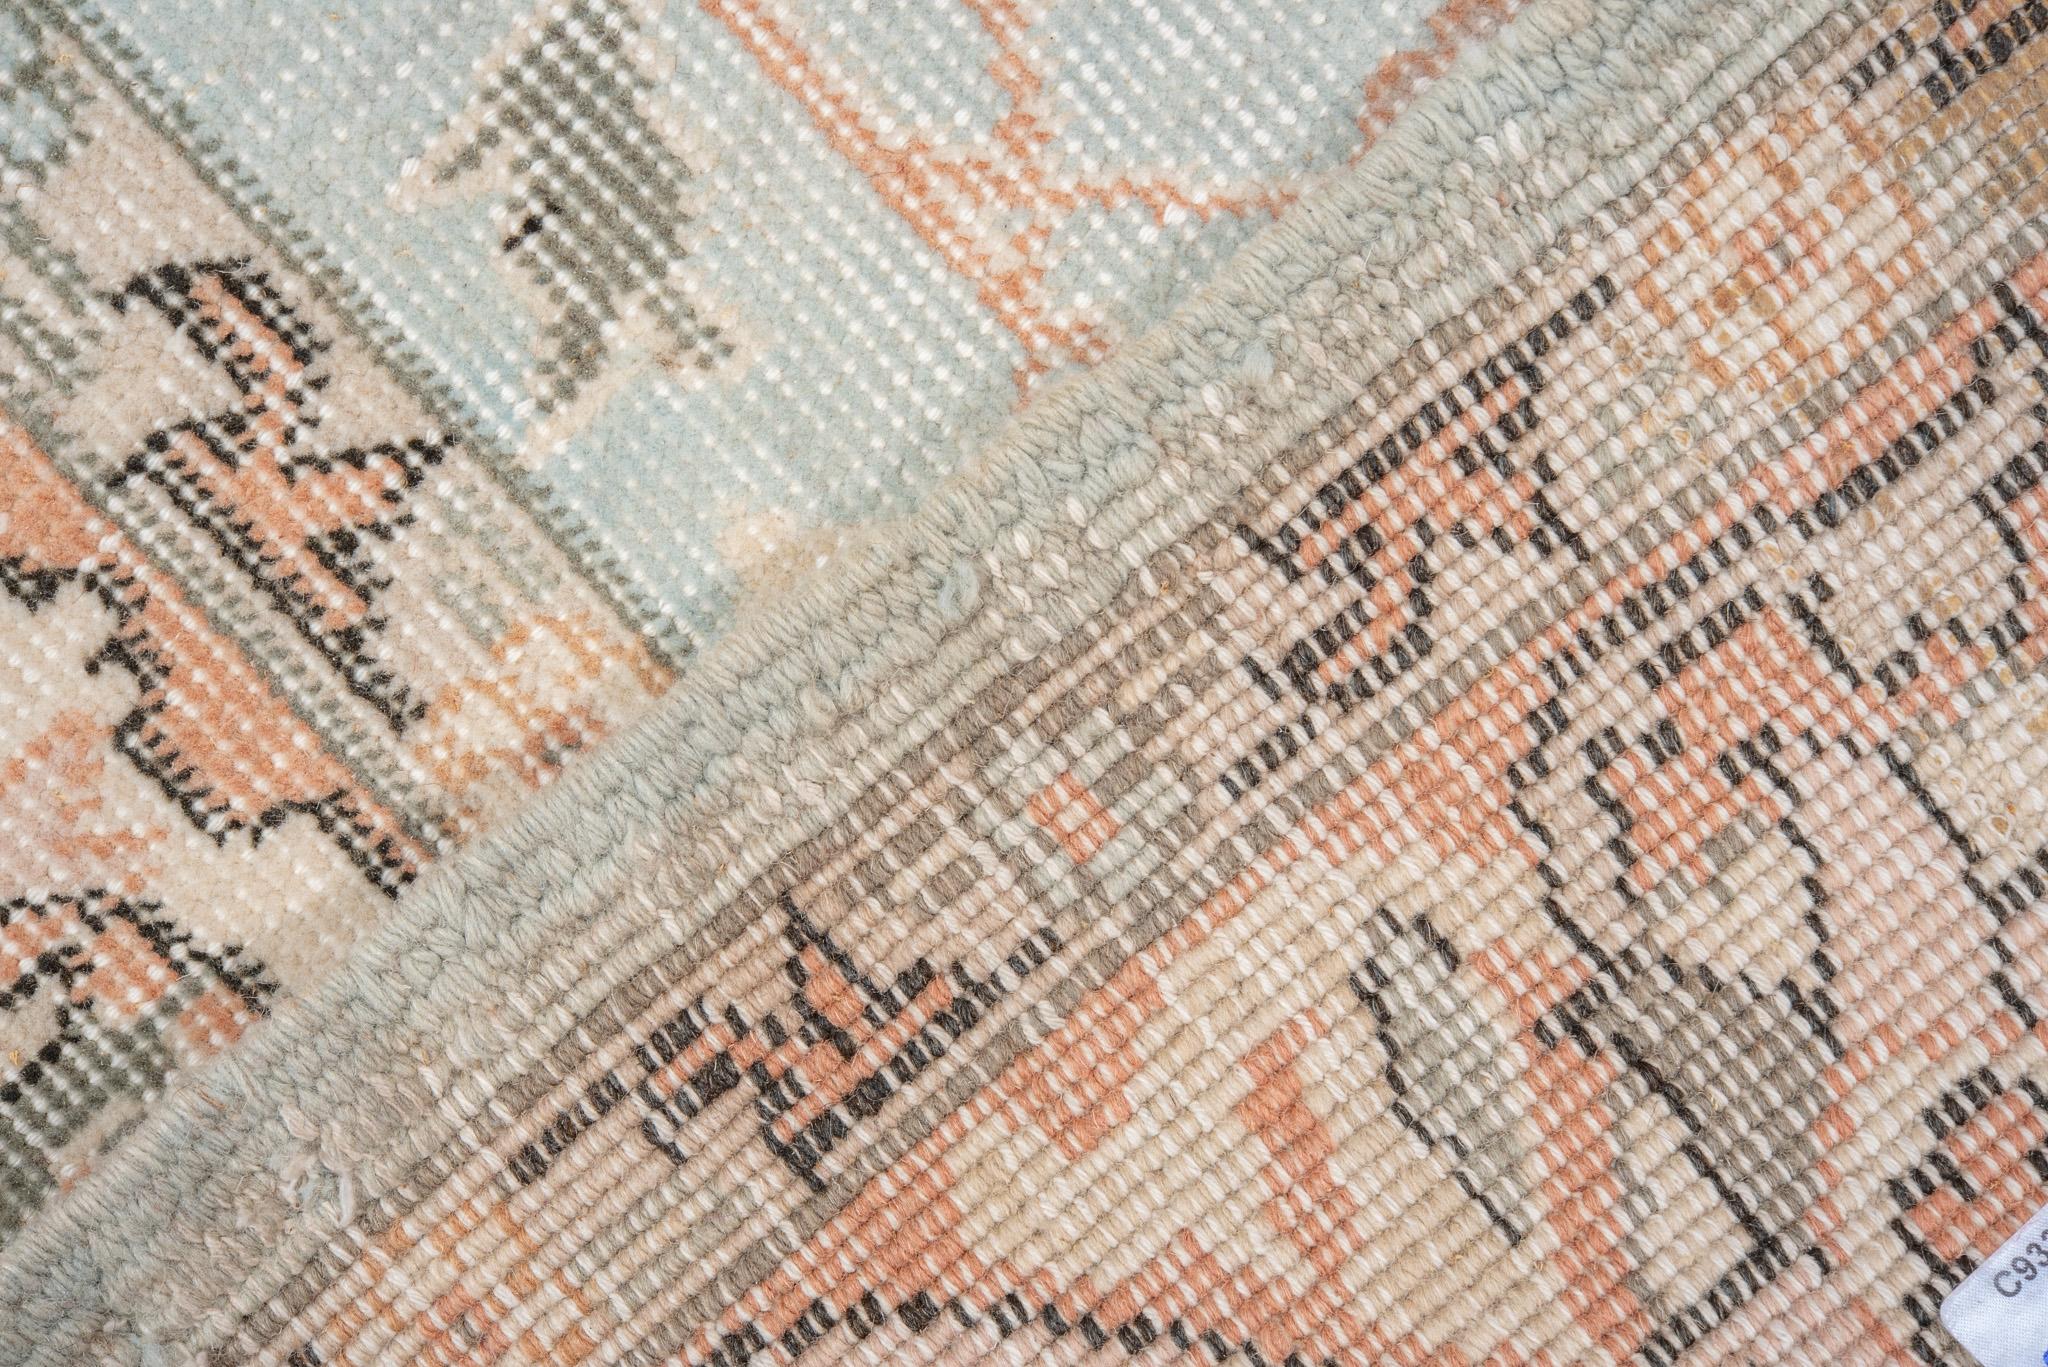 Eliko Rugs by David Ariel Turkish Sparta Rug, Aqua Field, Salmon Borders In Good Condition For Sale In New York, NY